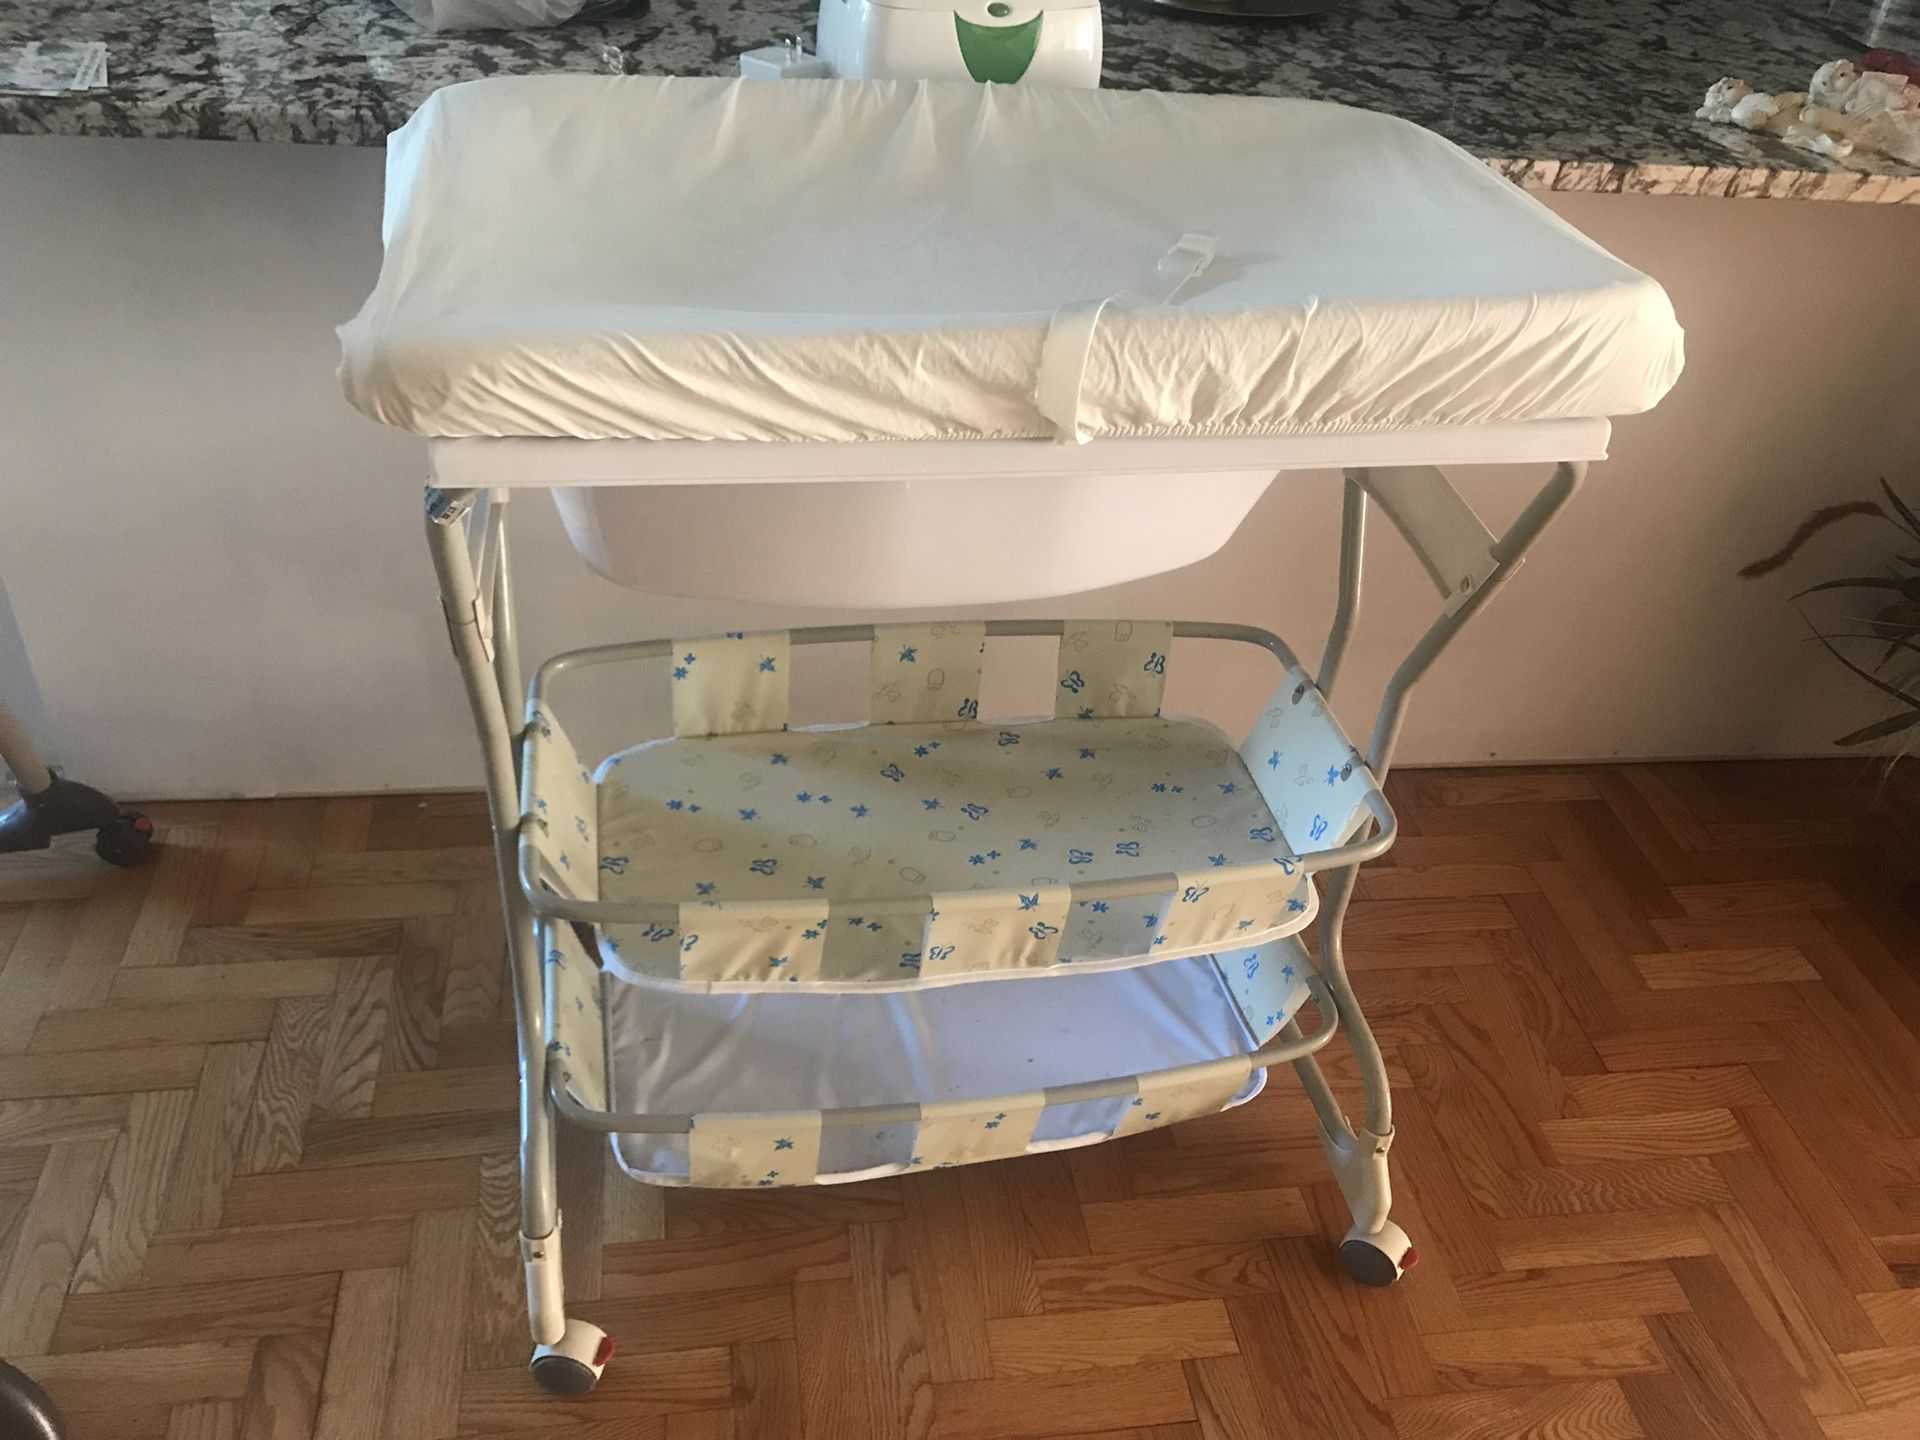 BABY changing table and bathtub Baby wipe warmer!